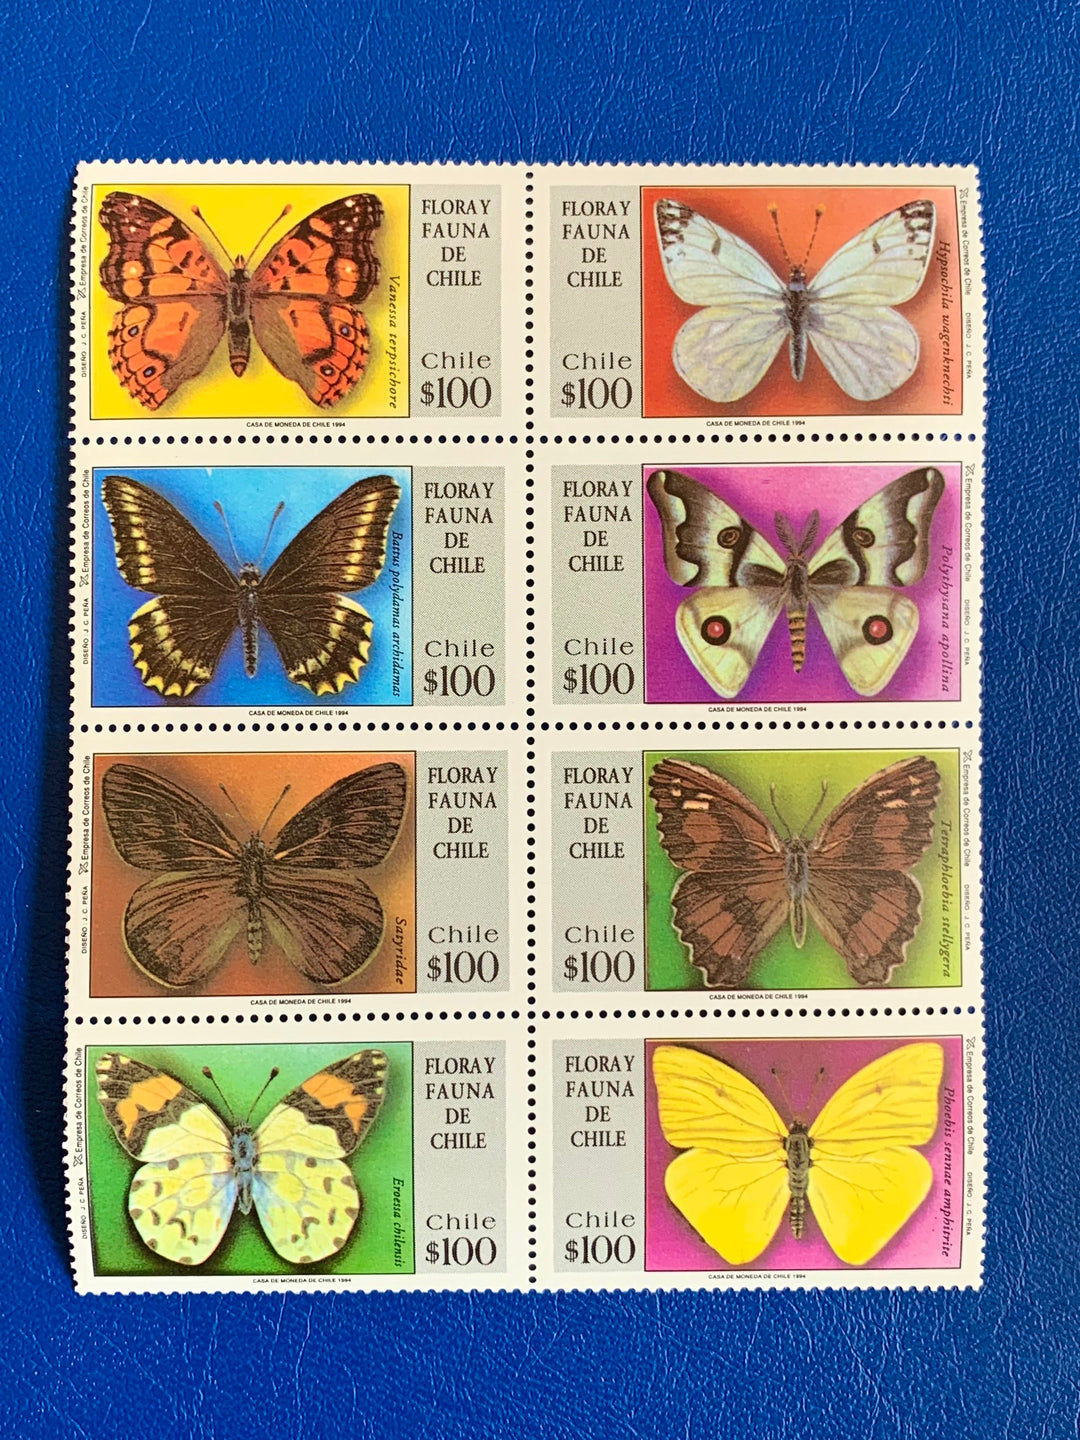 Chile - Original Vintage Postage Stamps- 1994 Butterflies of Chile Stamp Sheet- for the collector, artist or crafter